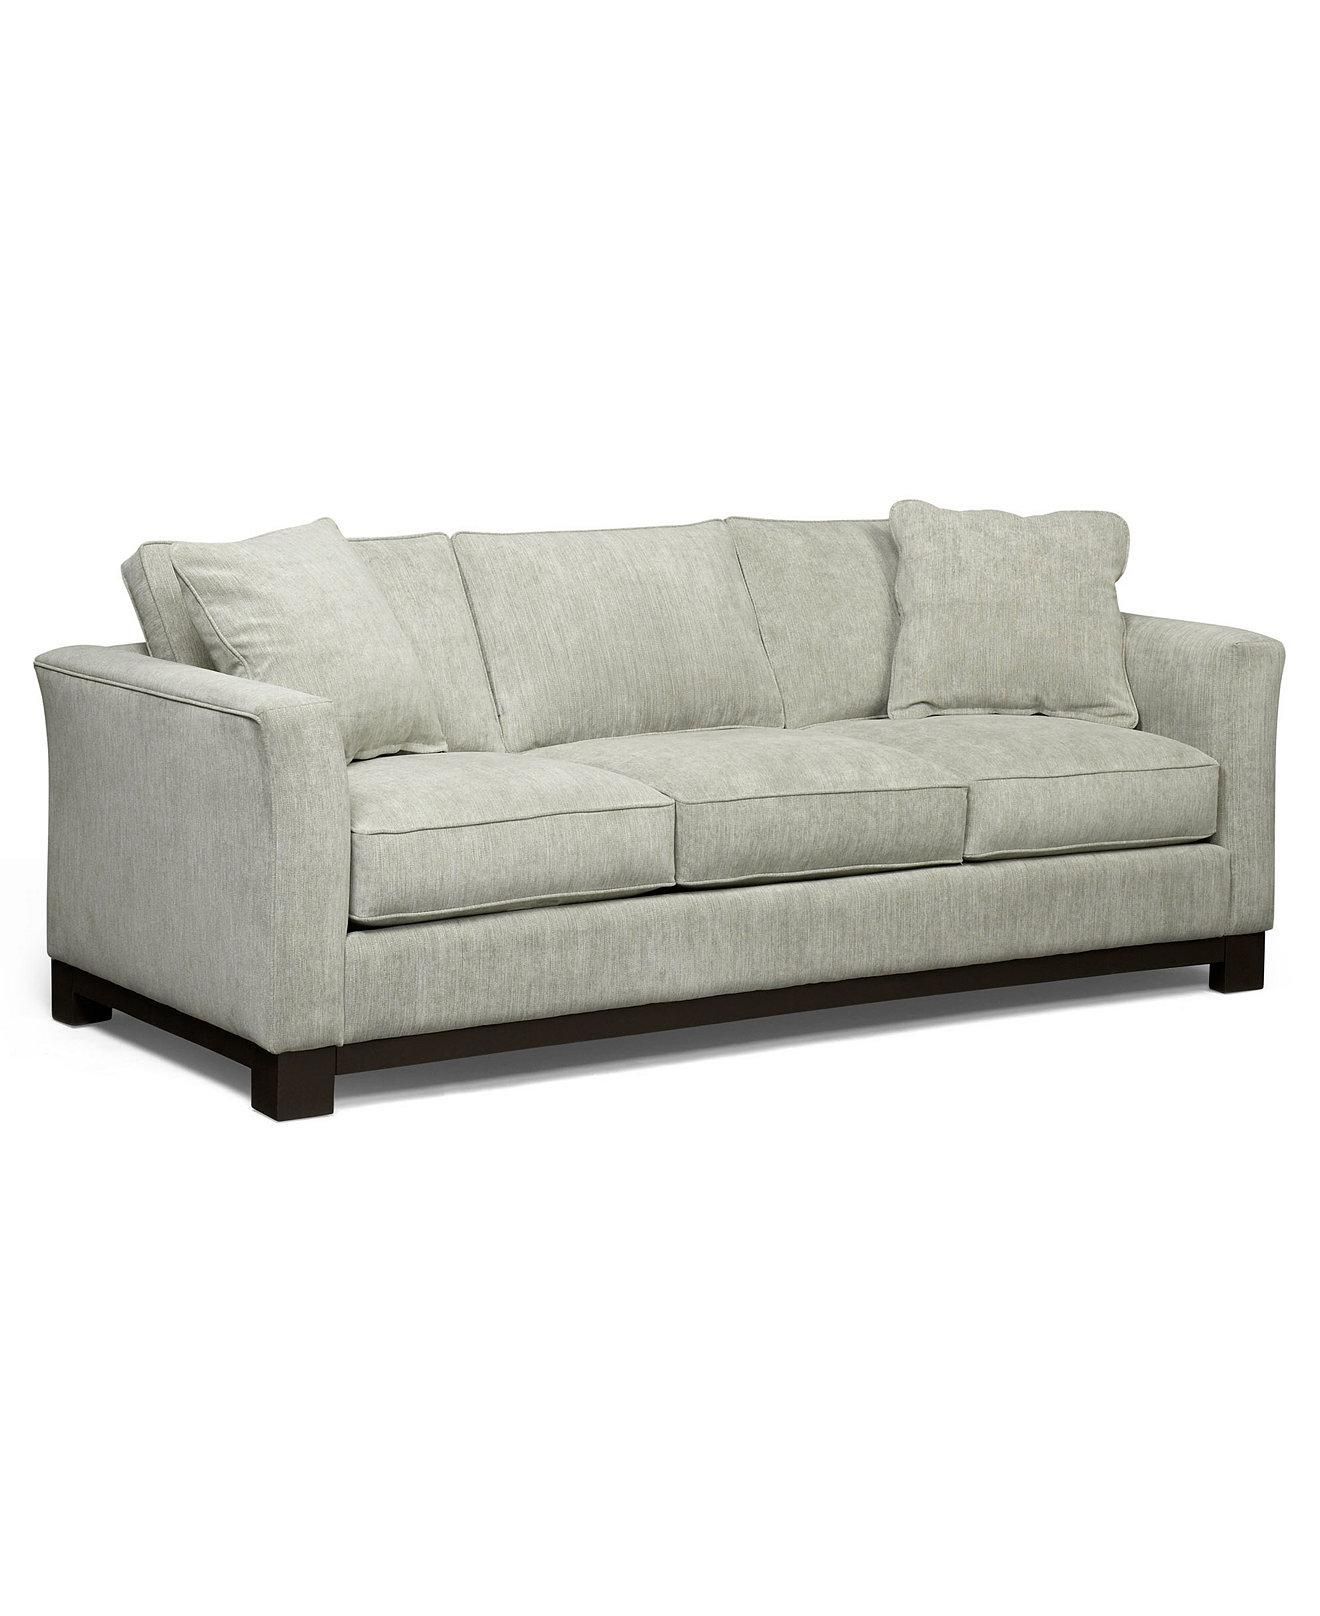 Kenton Fabric Sofa Bed Reviews | Tehranmix Decoration Intended For Macys Sofas (View 4 of 20)